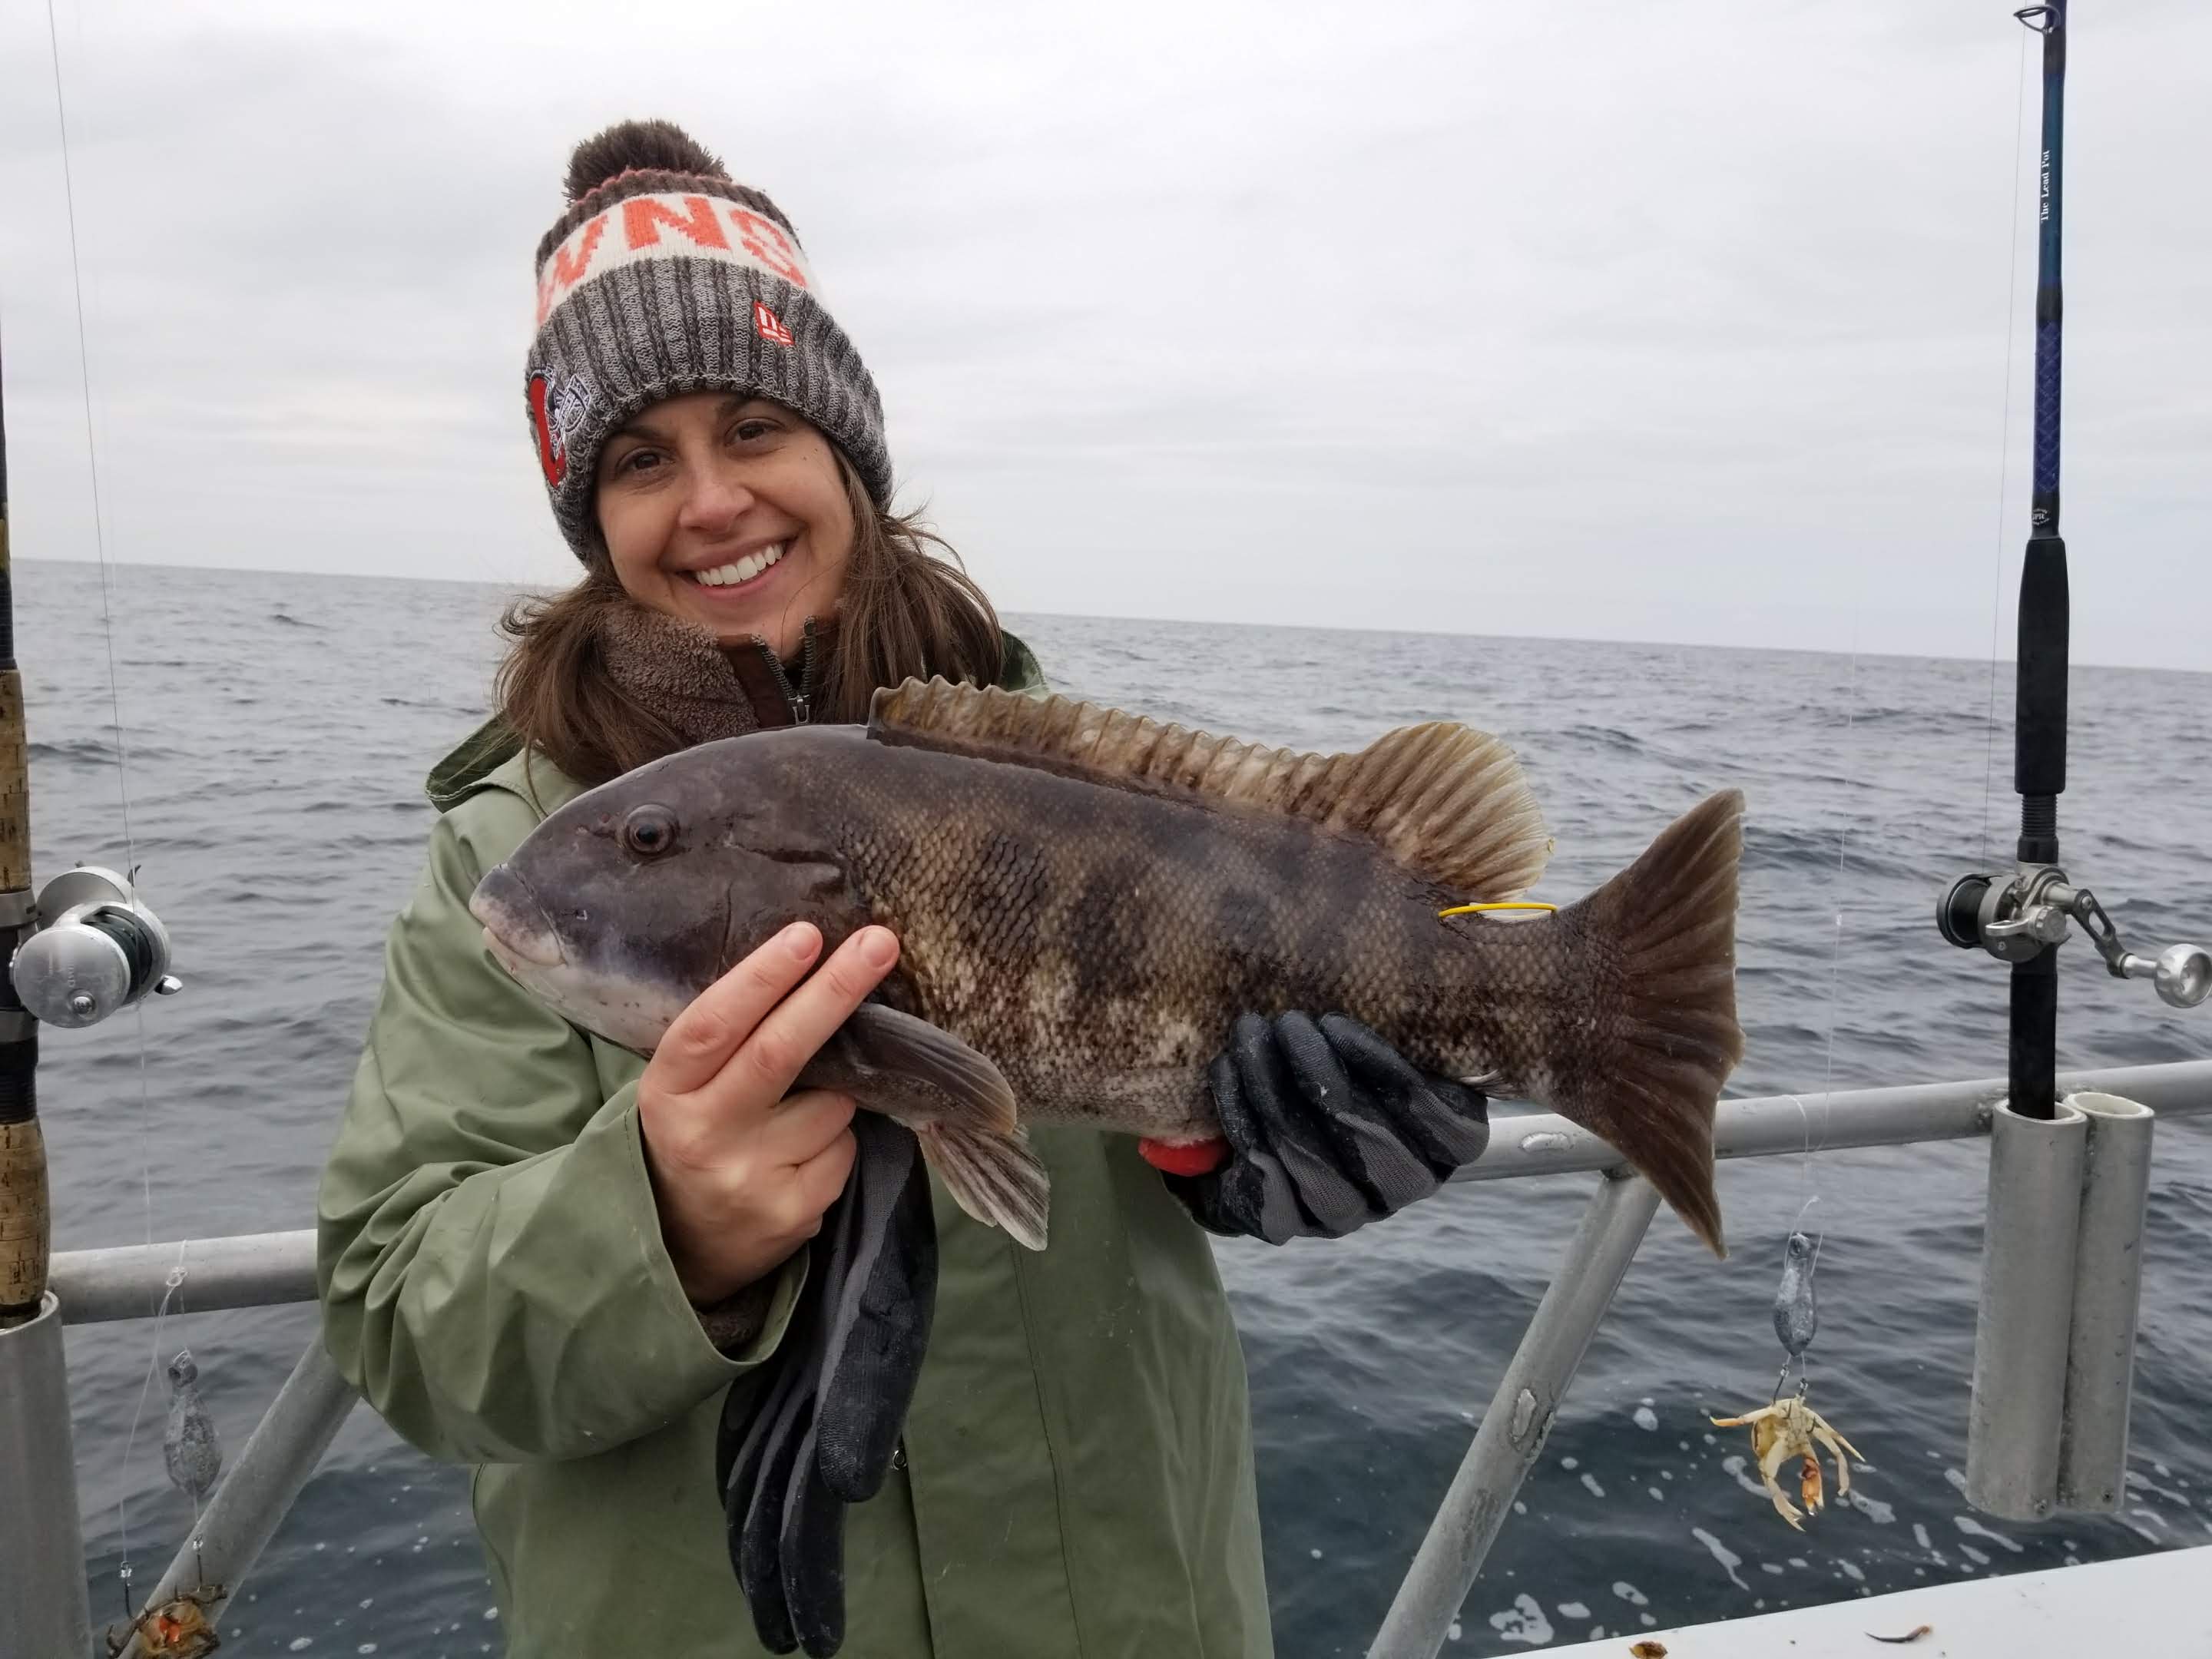 Virginia Fisheries Scientist Kate Wilke poses on a boat while holding a brown-striped fish.